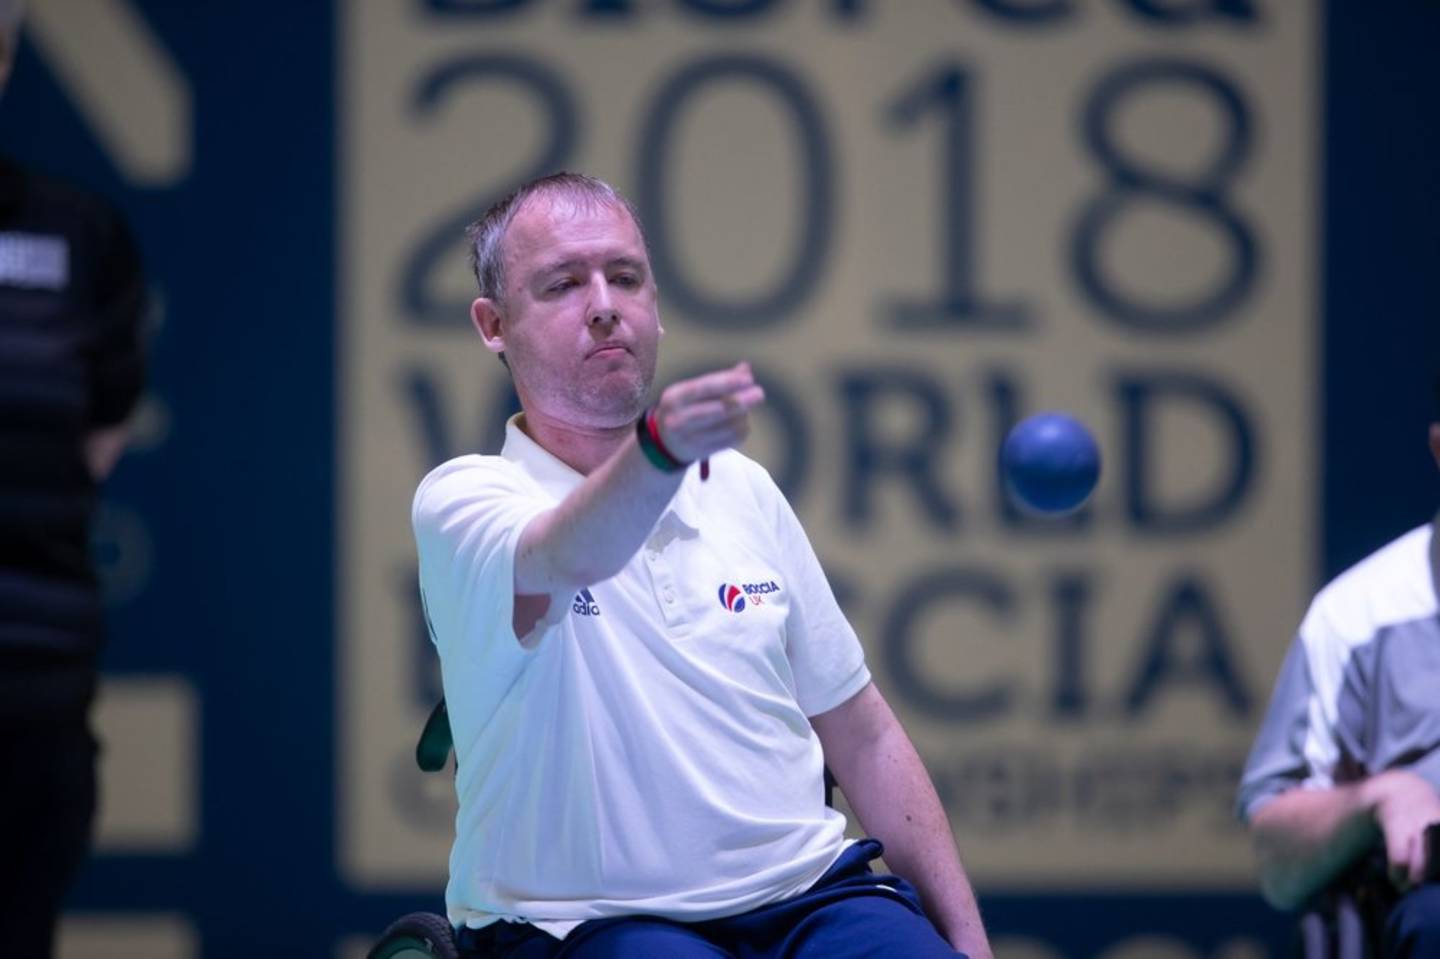 Stephen McGuire in action at World Boccia Championships 2018